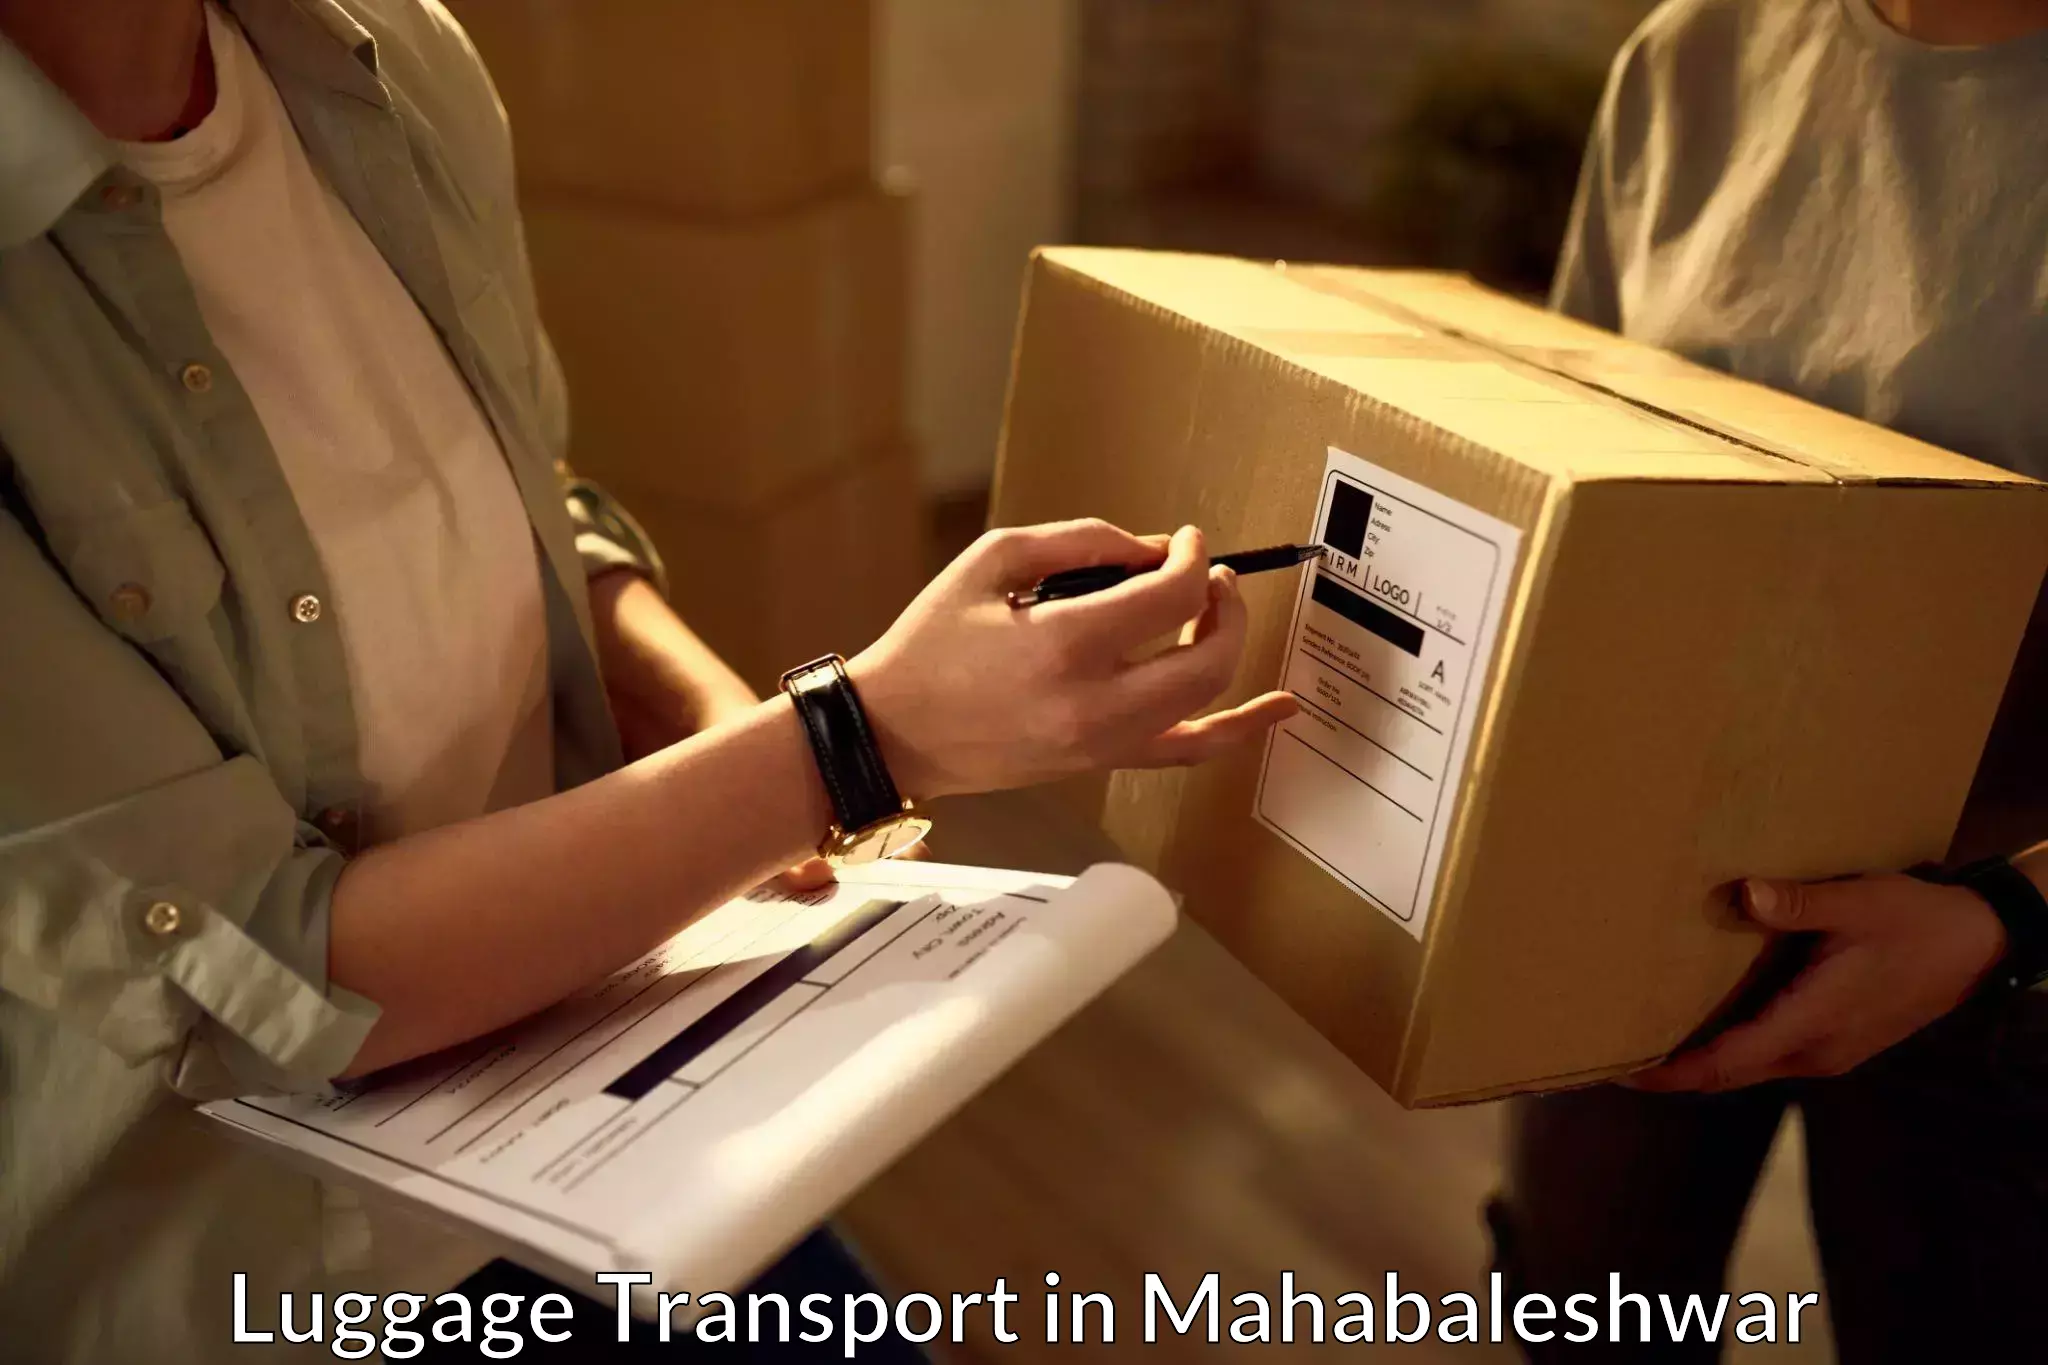 Luggage transport solutions in Mahabaleshwar